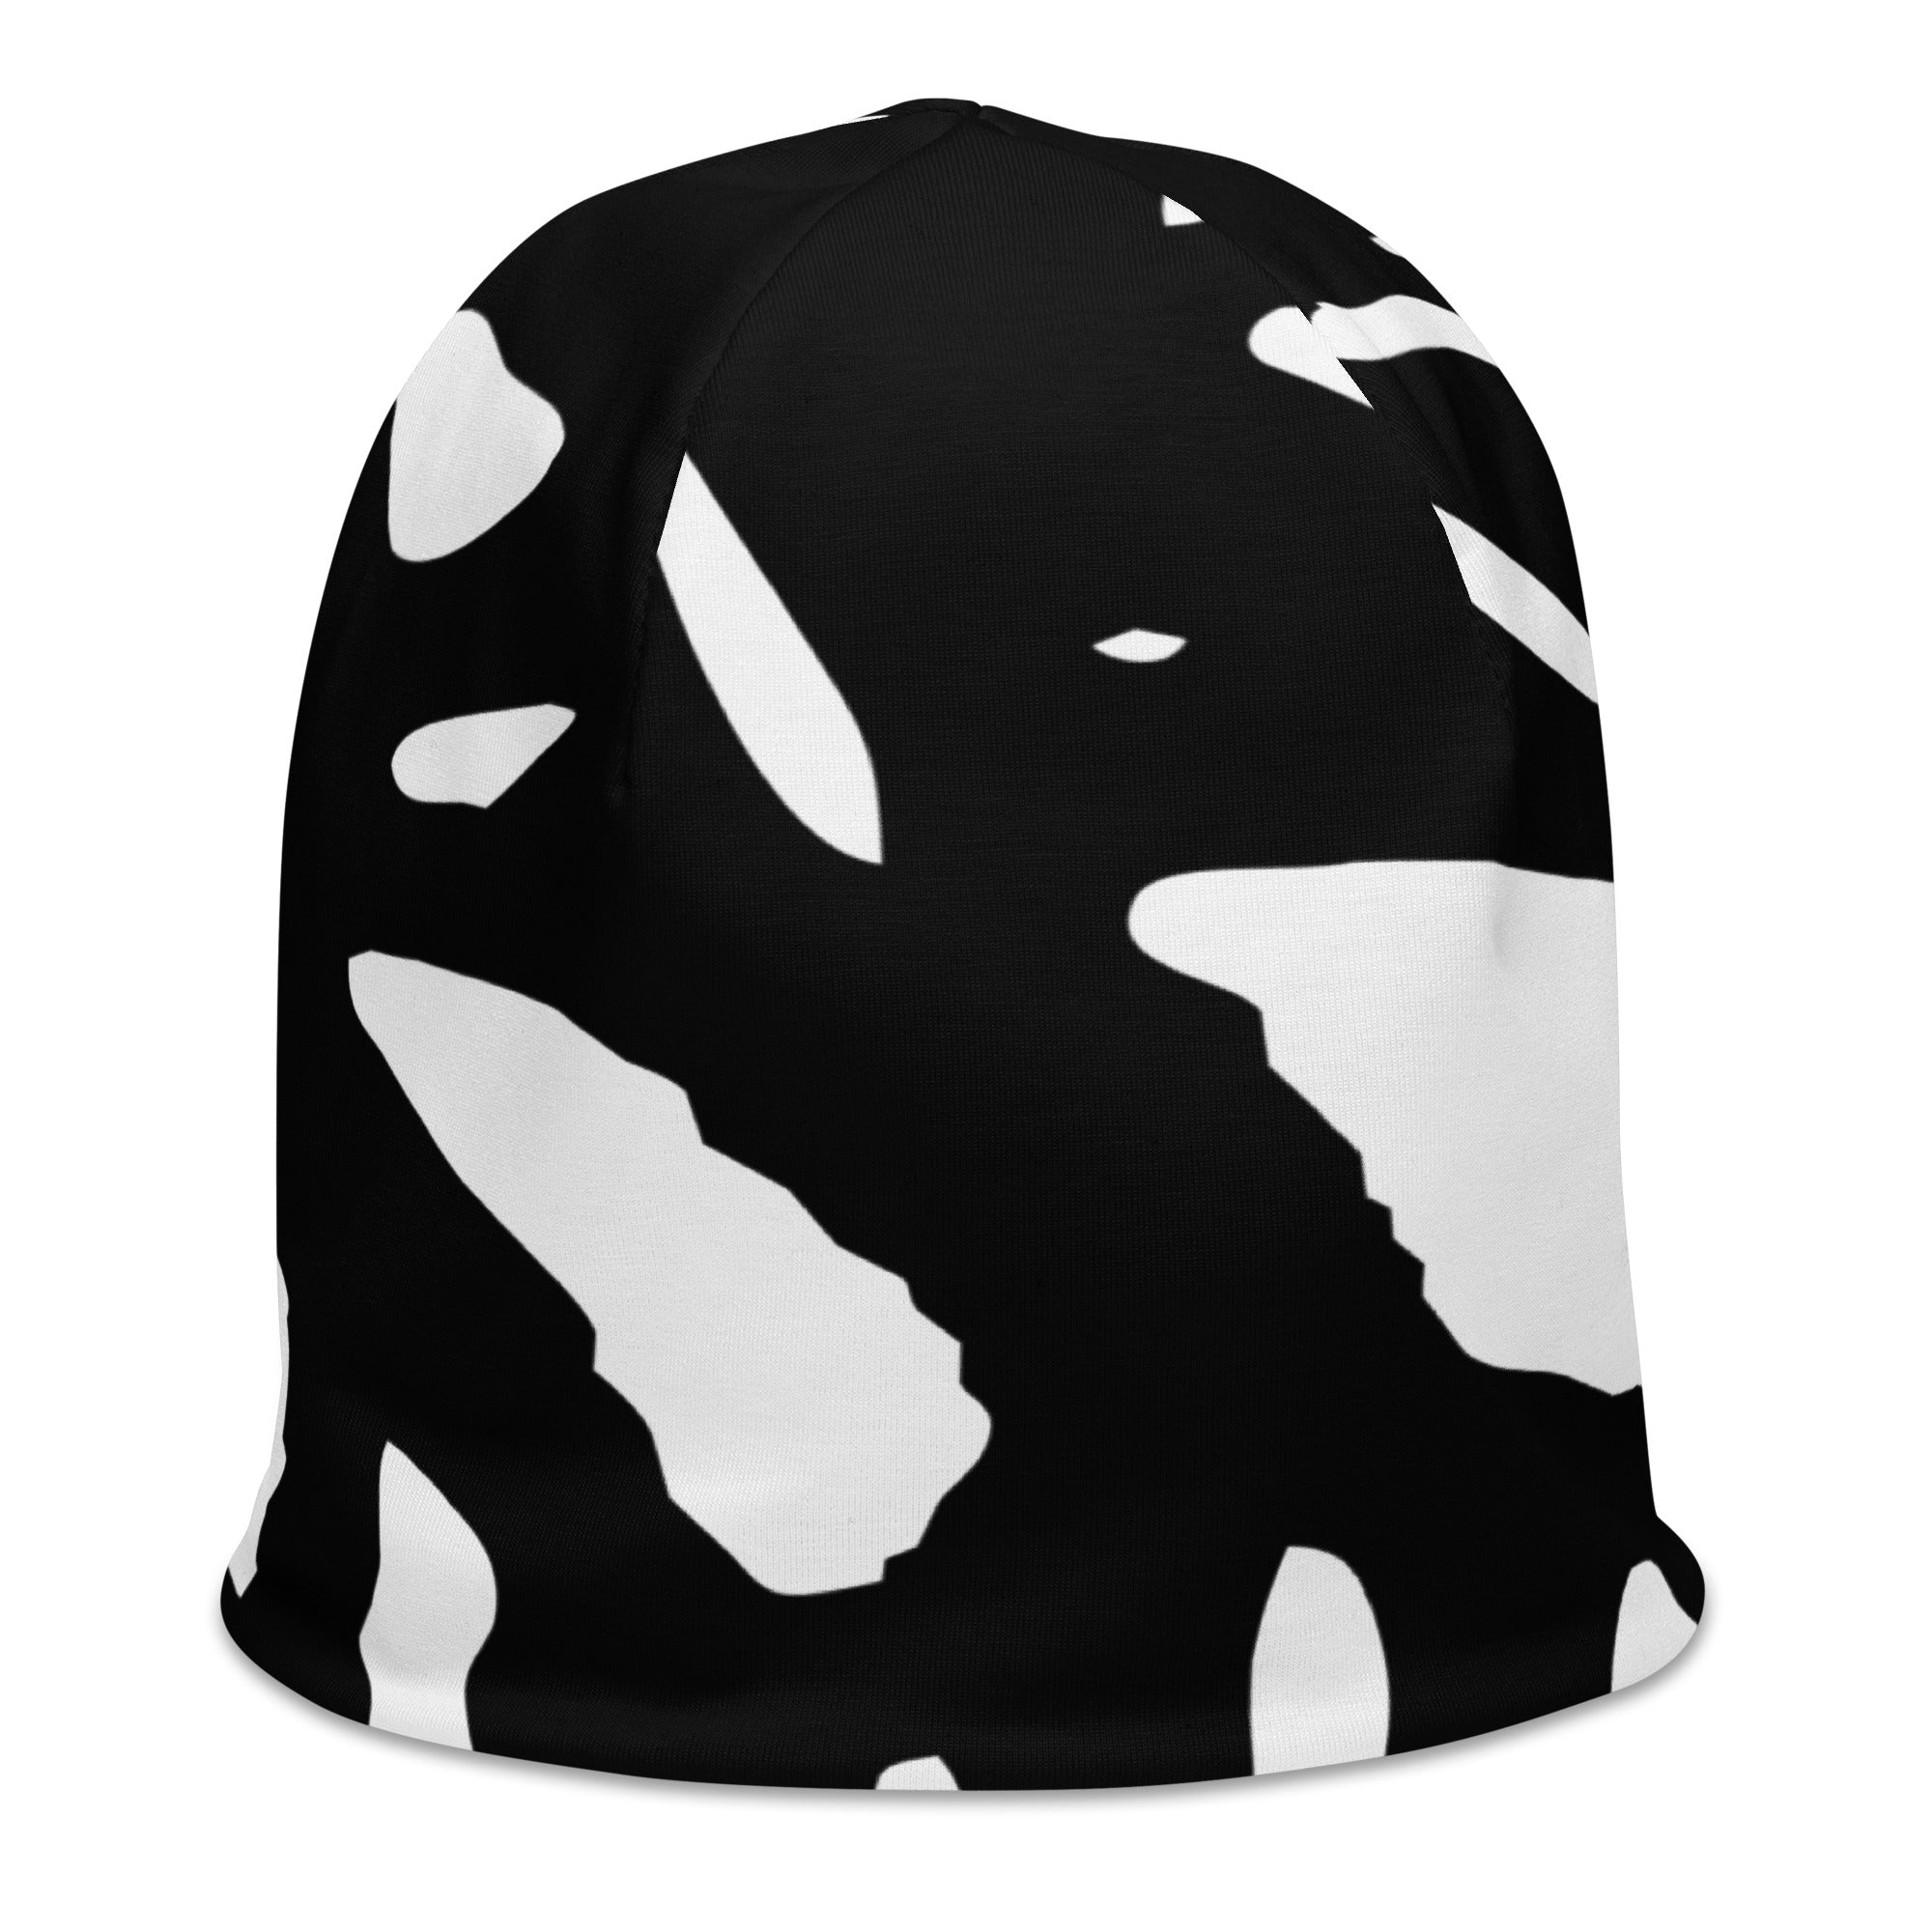 SATURATE - JOE STYLE All-Over Print Beanie